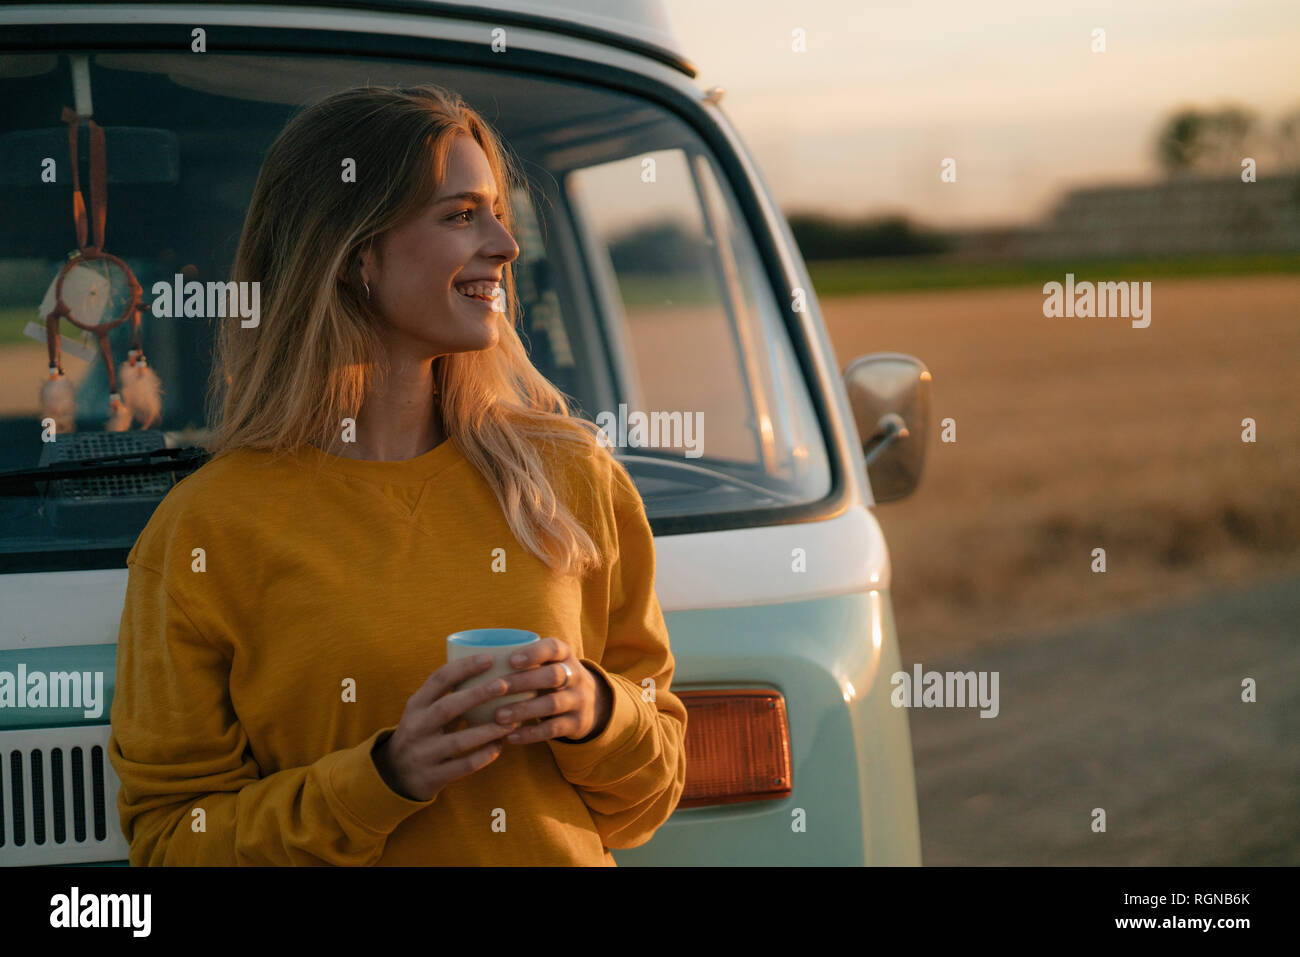 Happy young woman holding mug at camper van in rural landscape at sunset Stock Photo